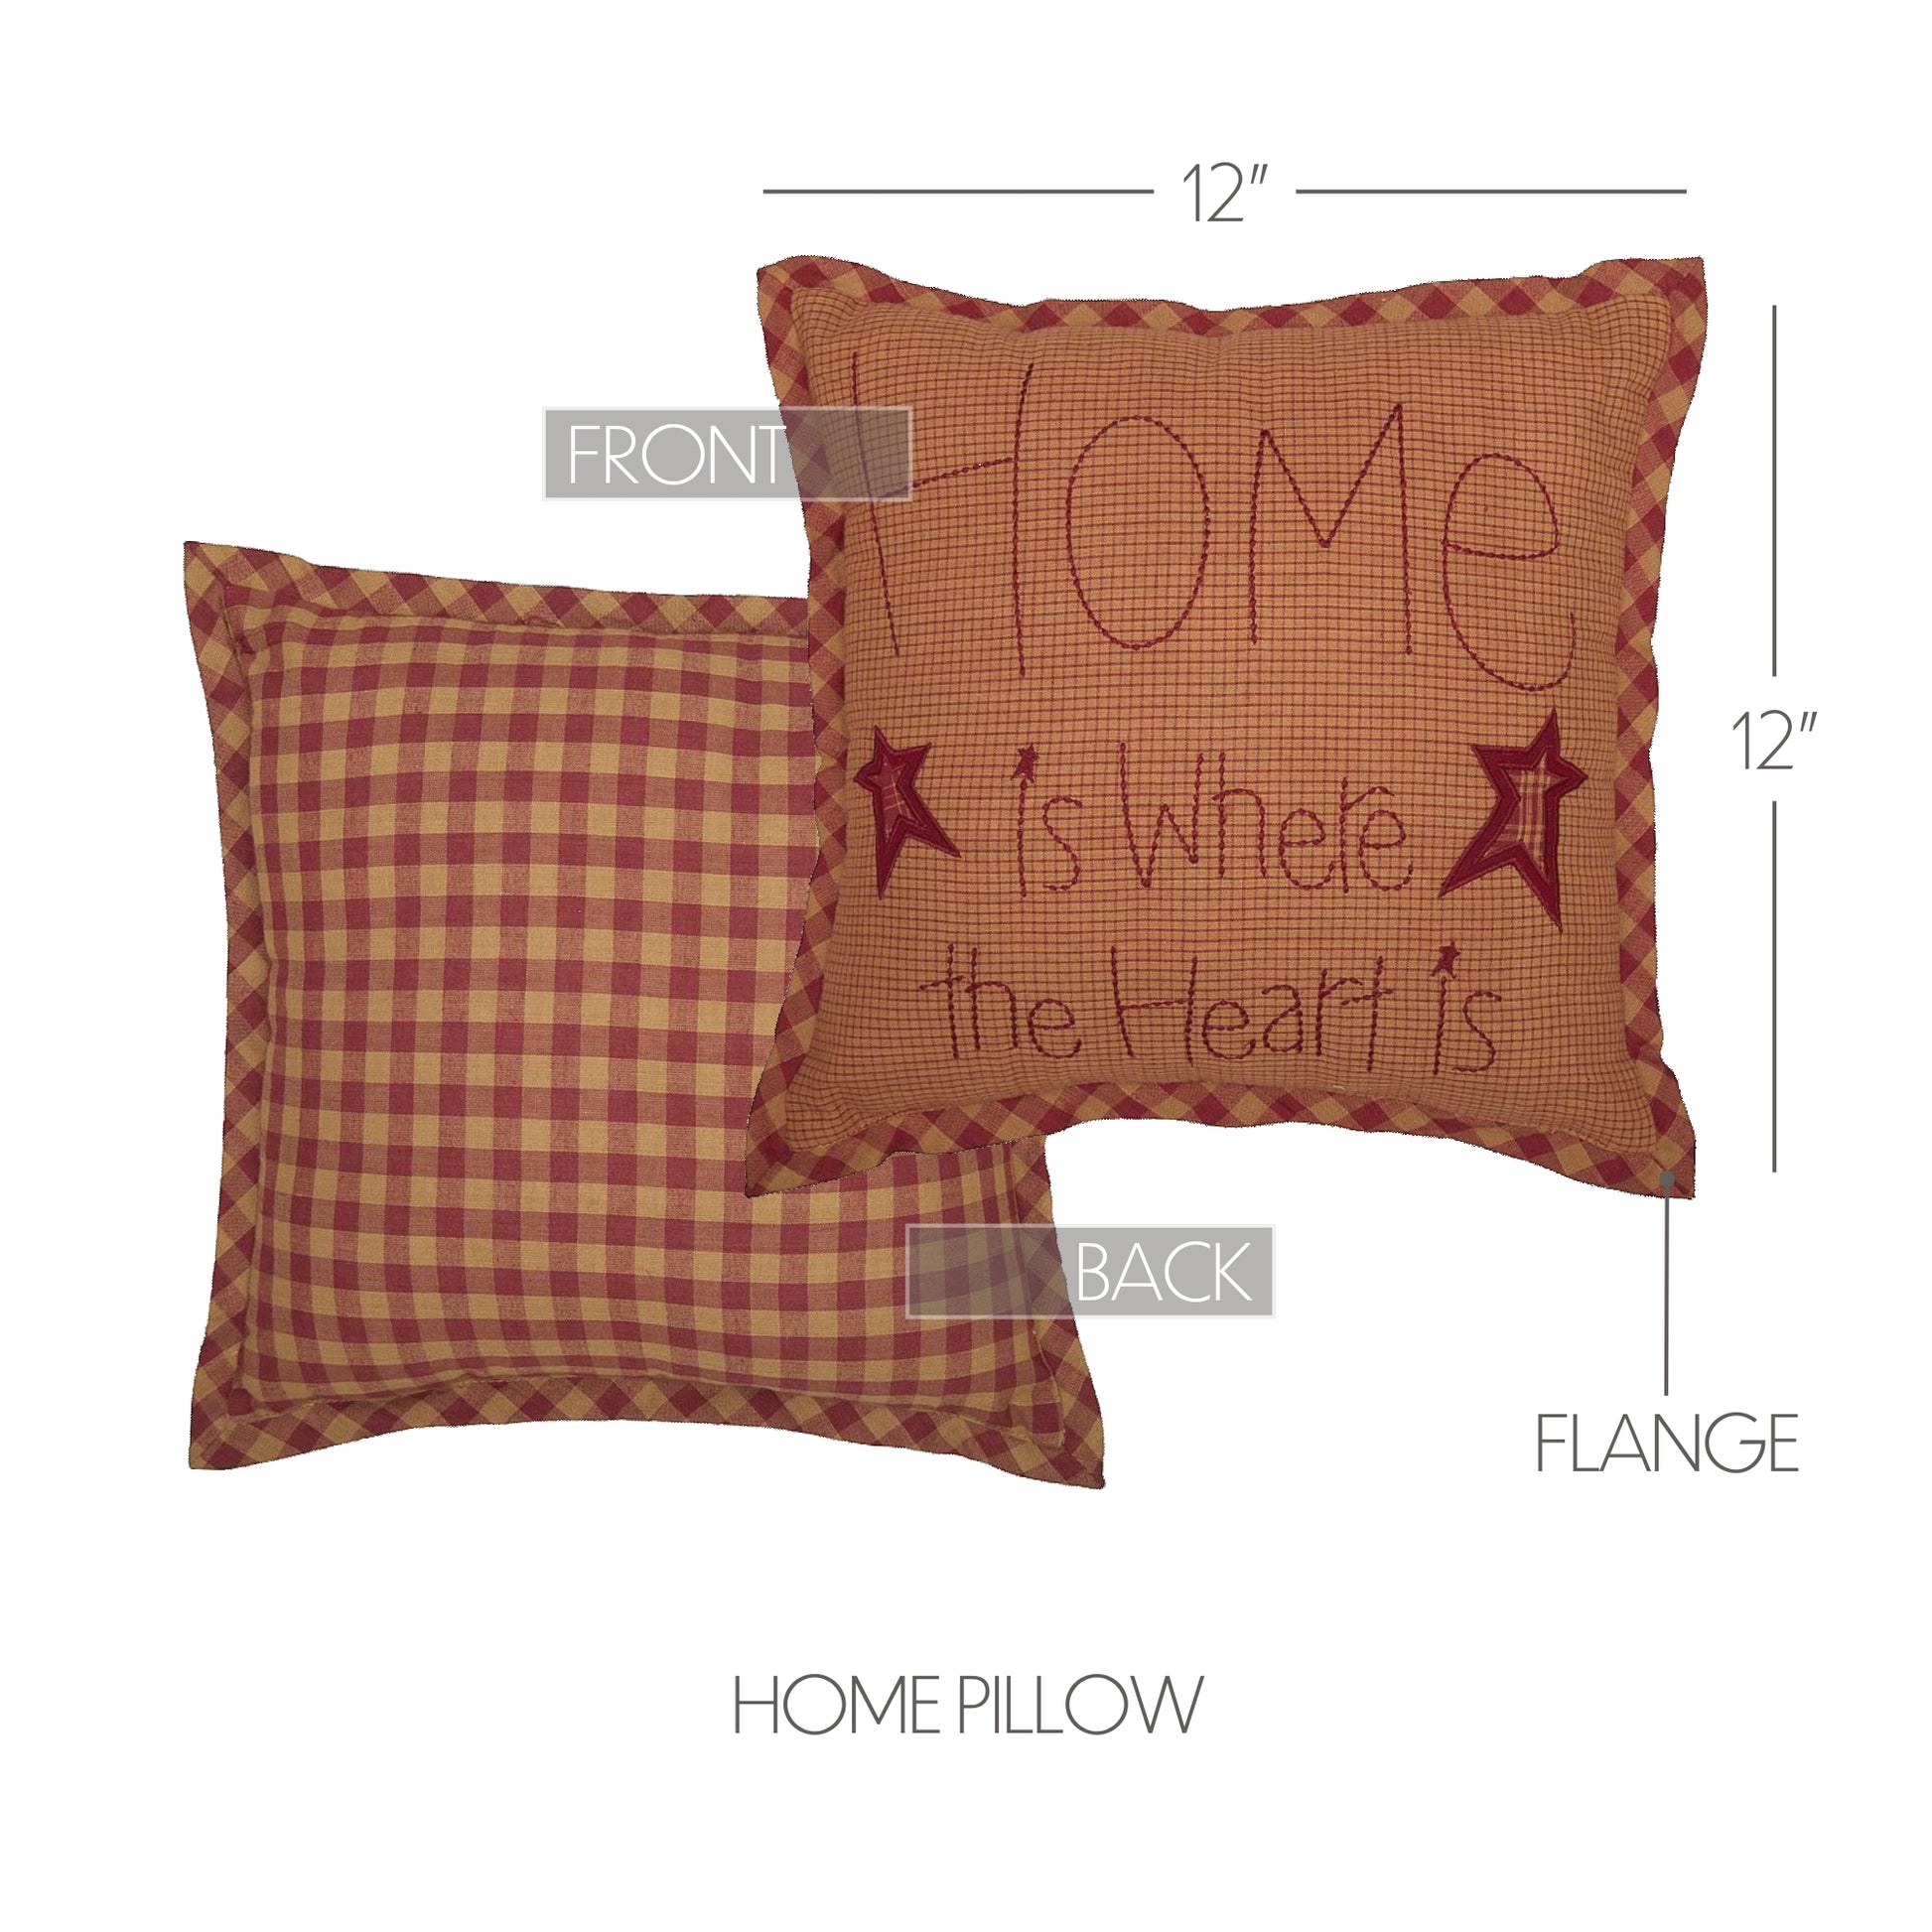 56741-Ninepatch-Star-Home-Pillow-12x12-image-1